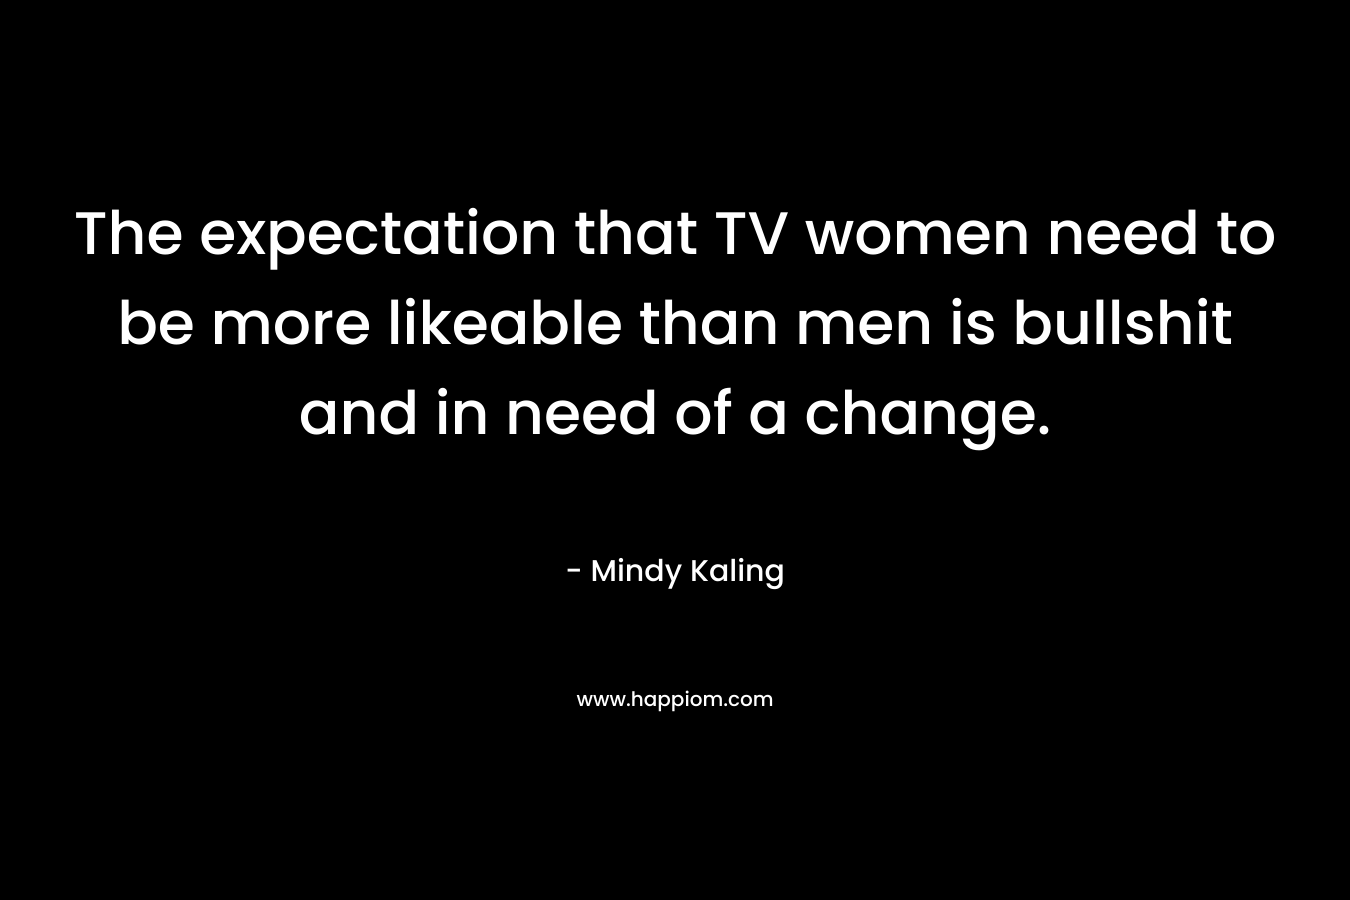 The expectation that TV women need to be more likeable than men is bullshit and in need of a change.